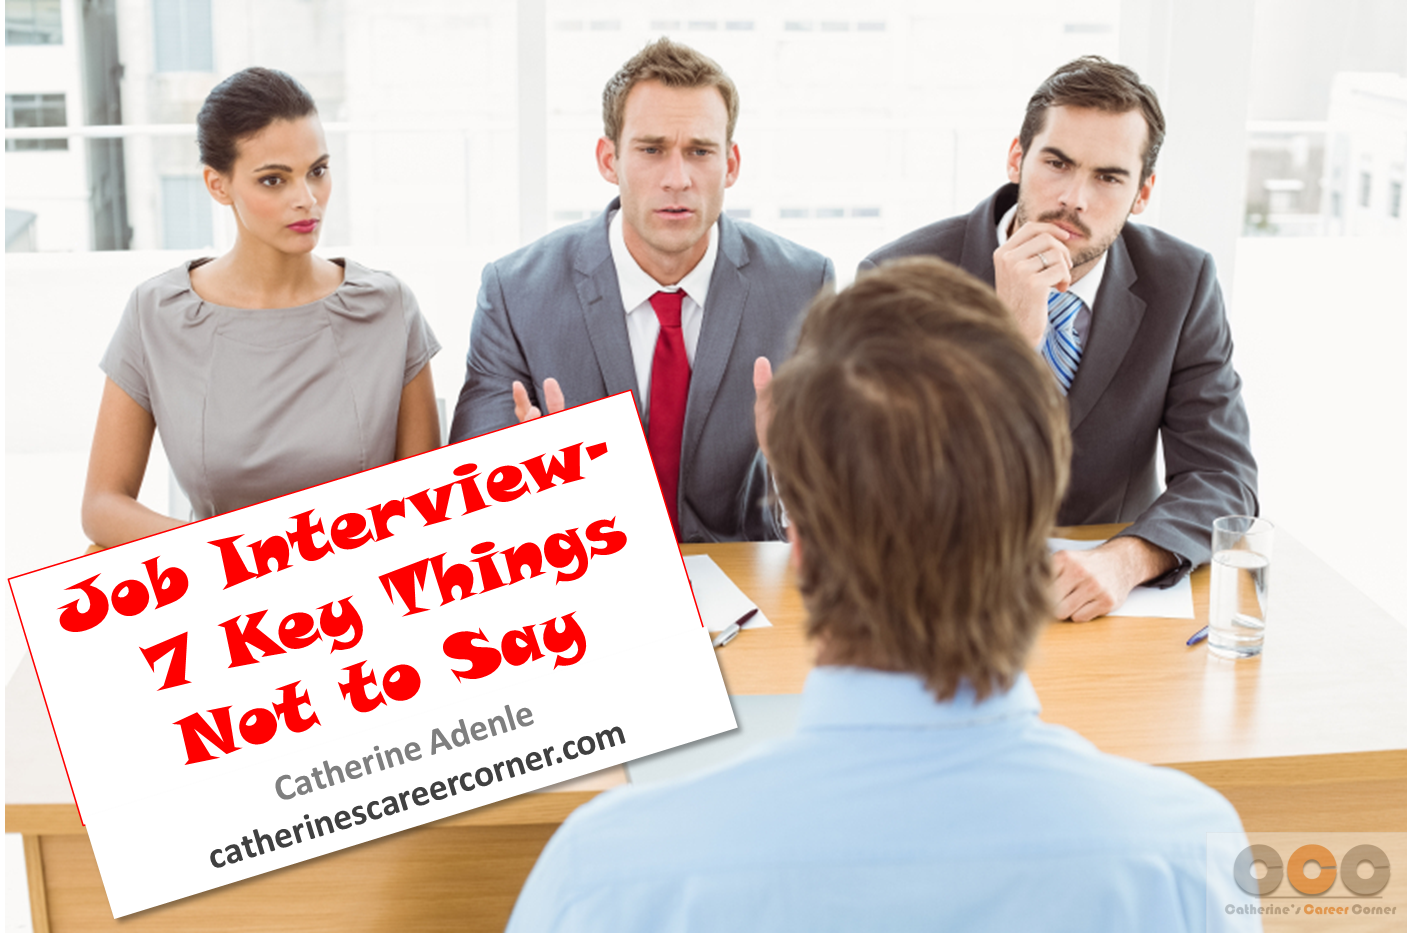 Job Interview_7 Key Things Not to Say